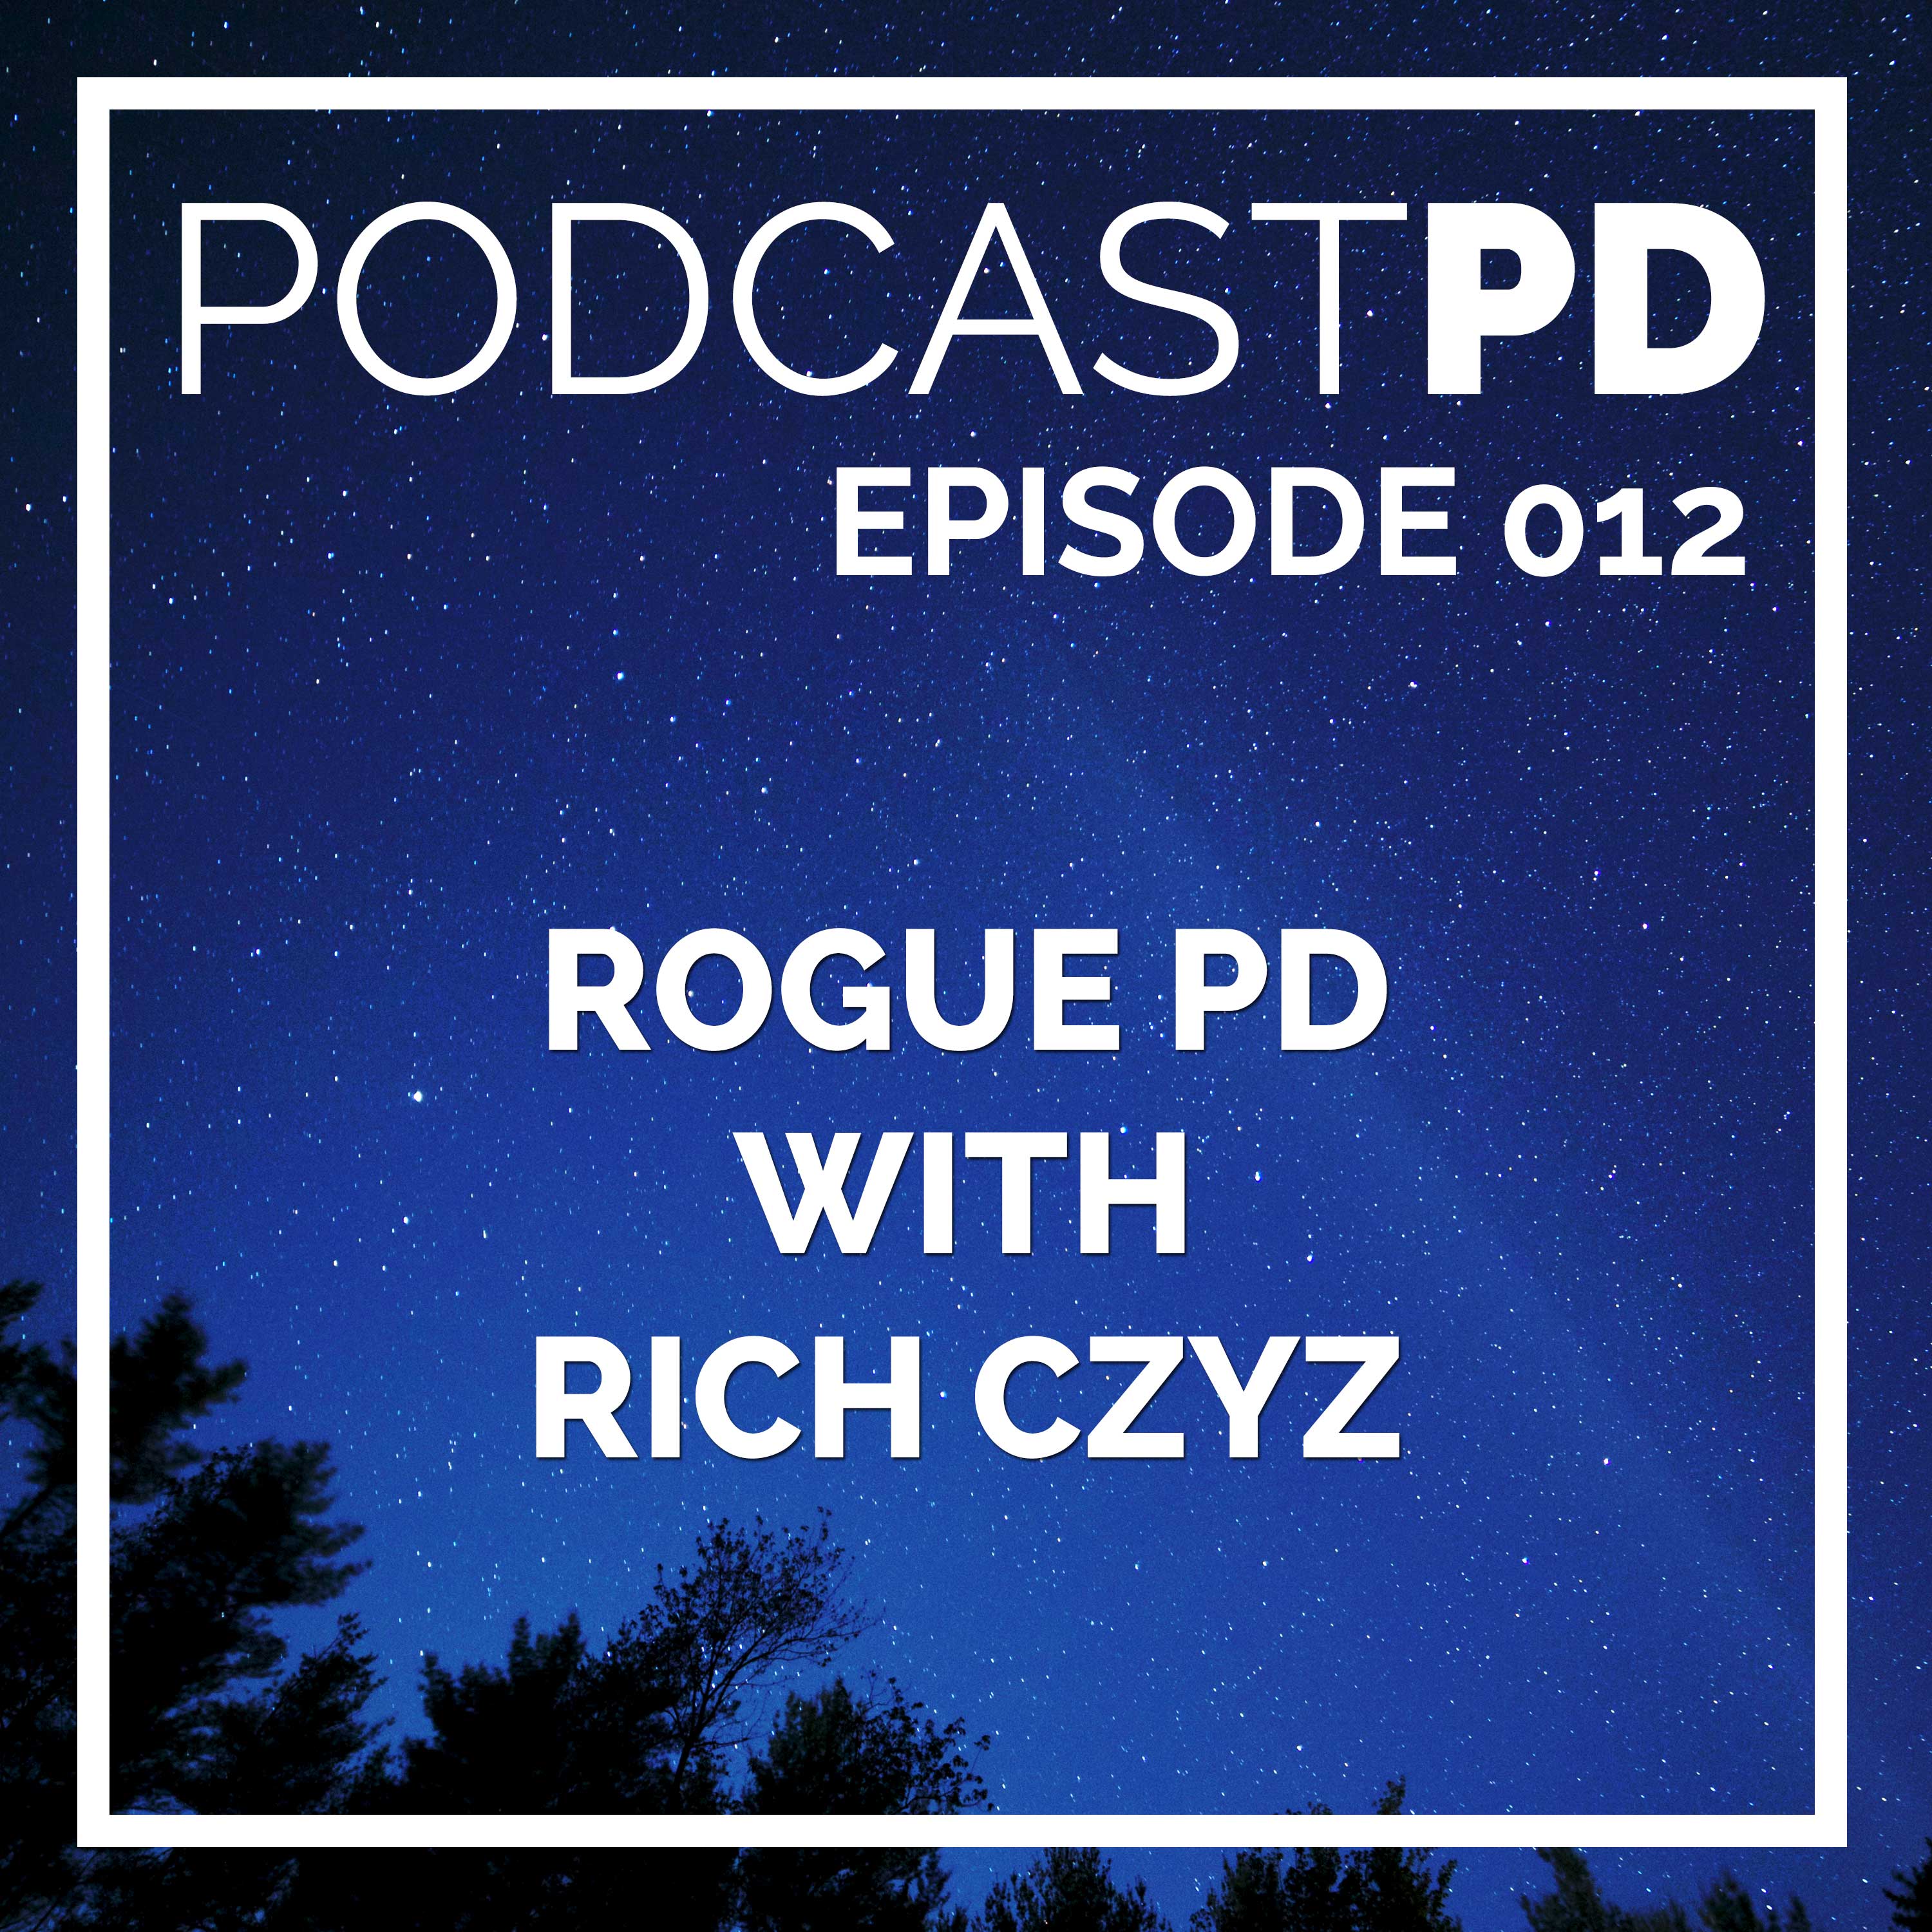 Rogue PD with Rich Czyz Image